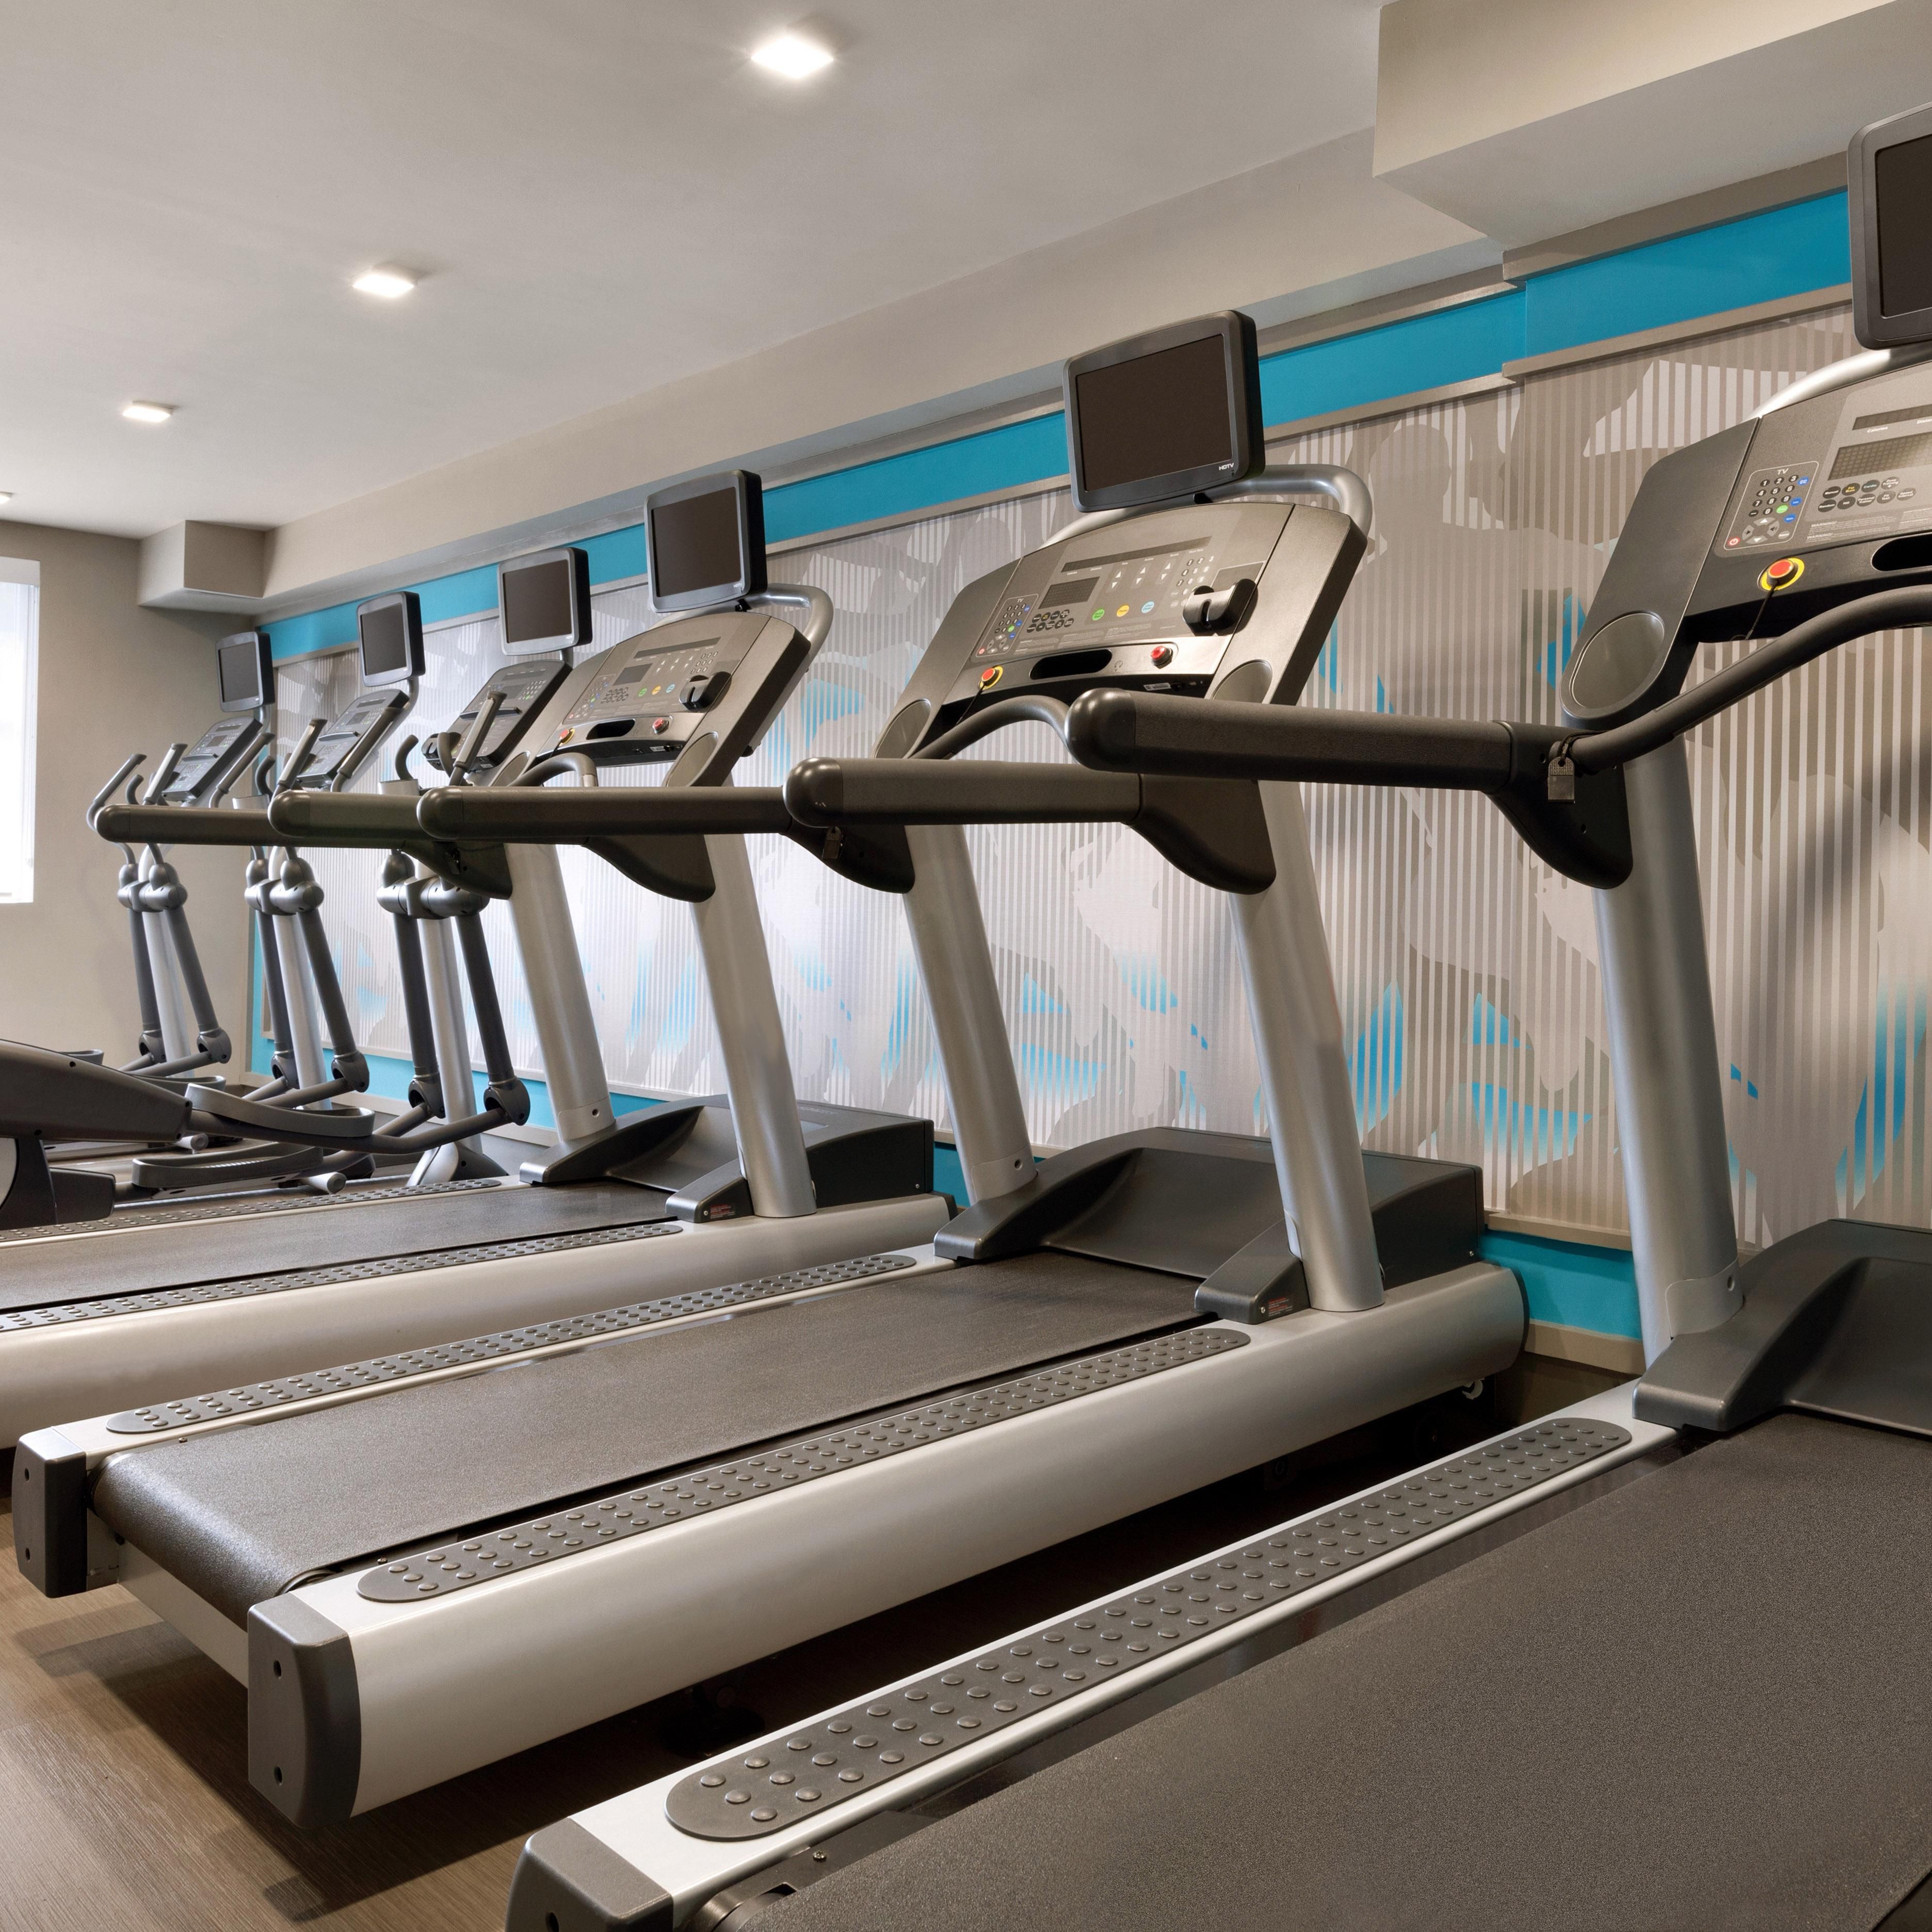 Our fitness center includes a variety of workout machines.